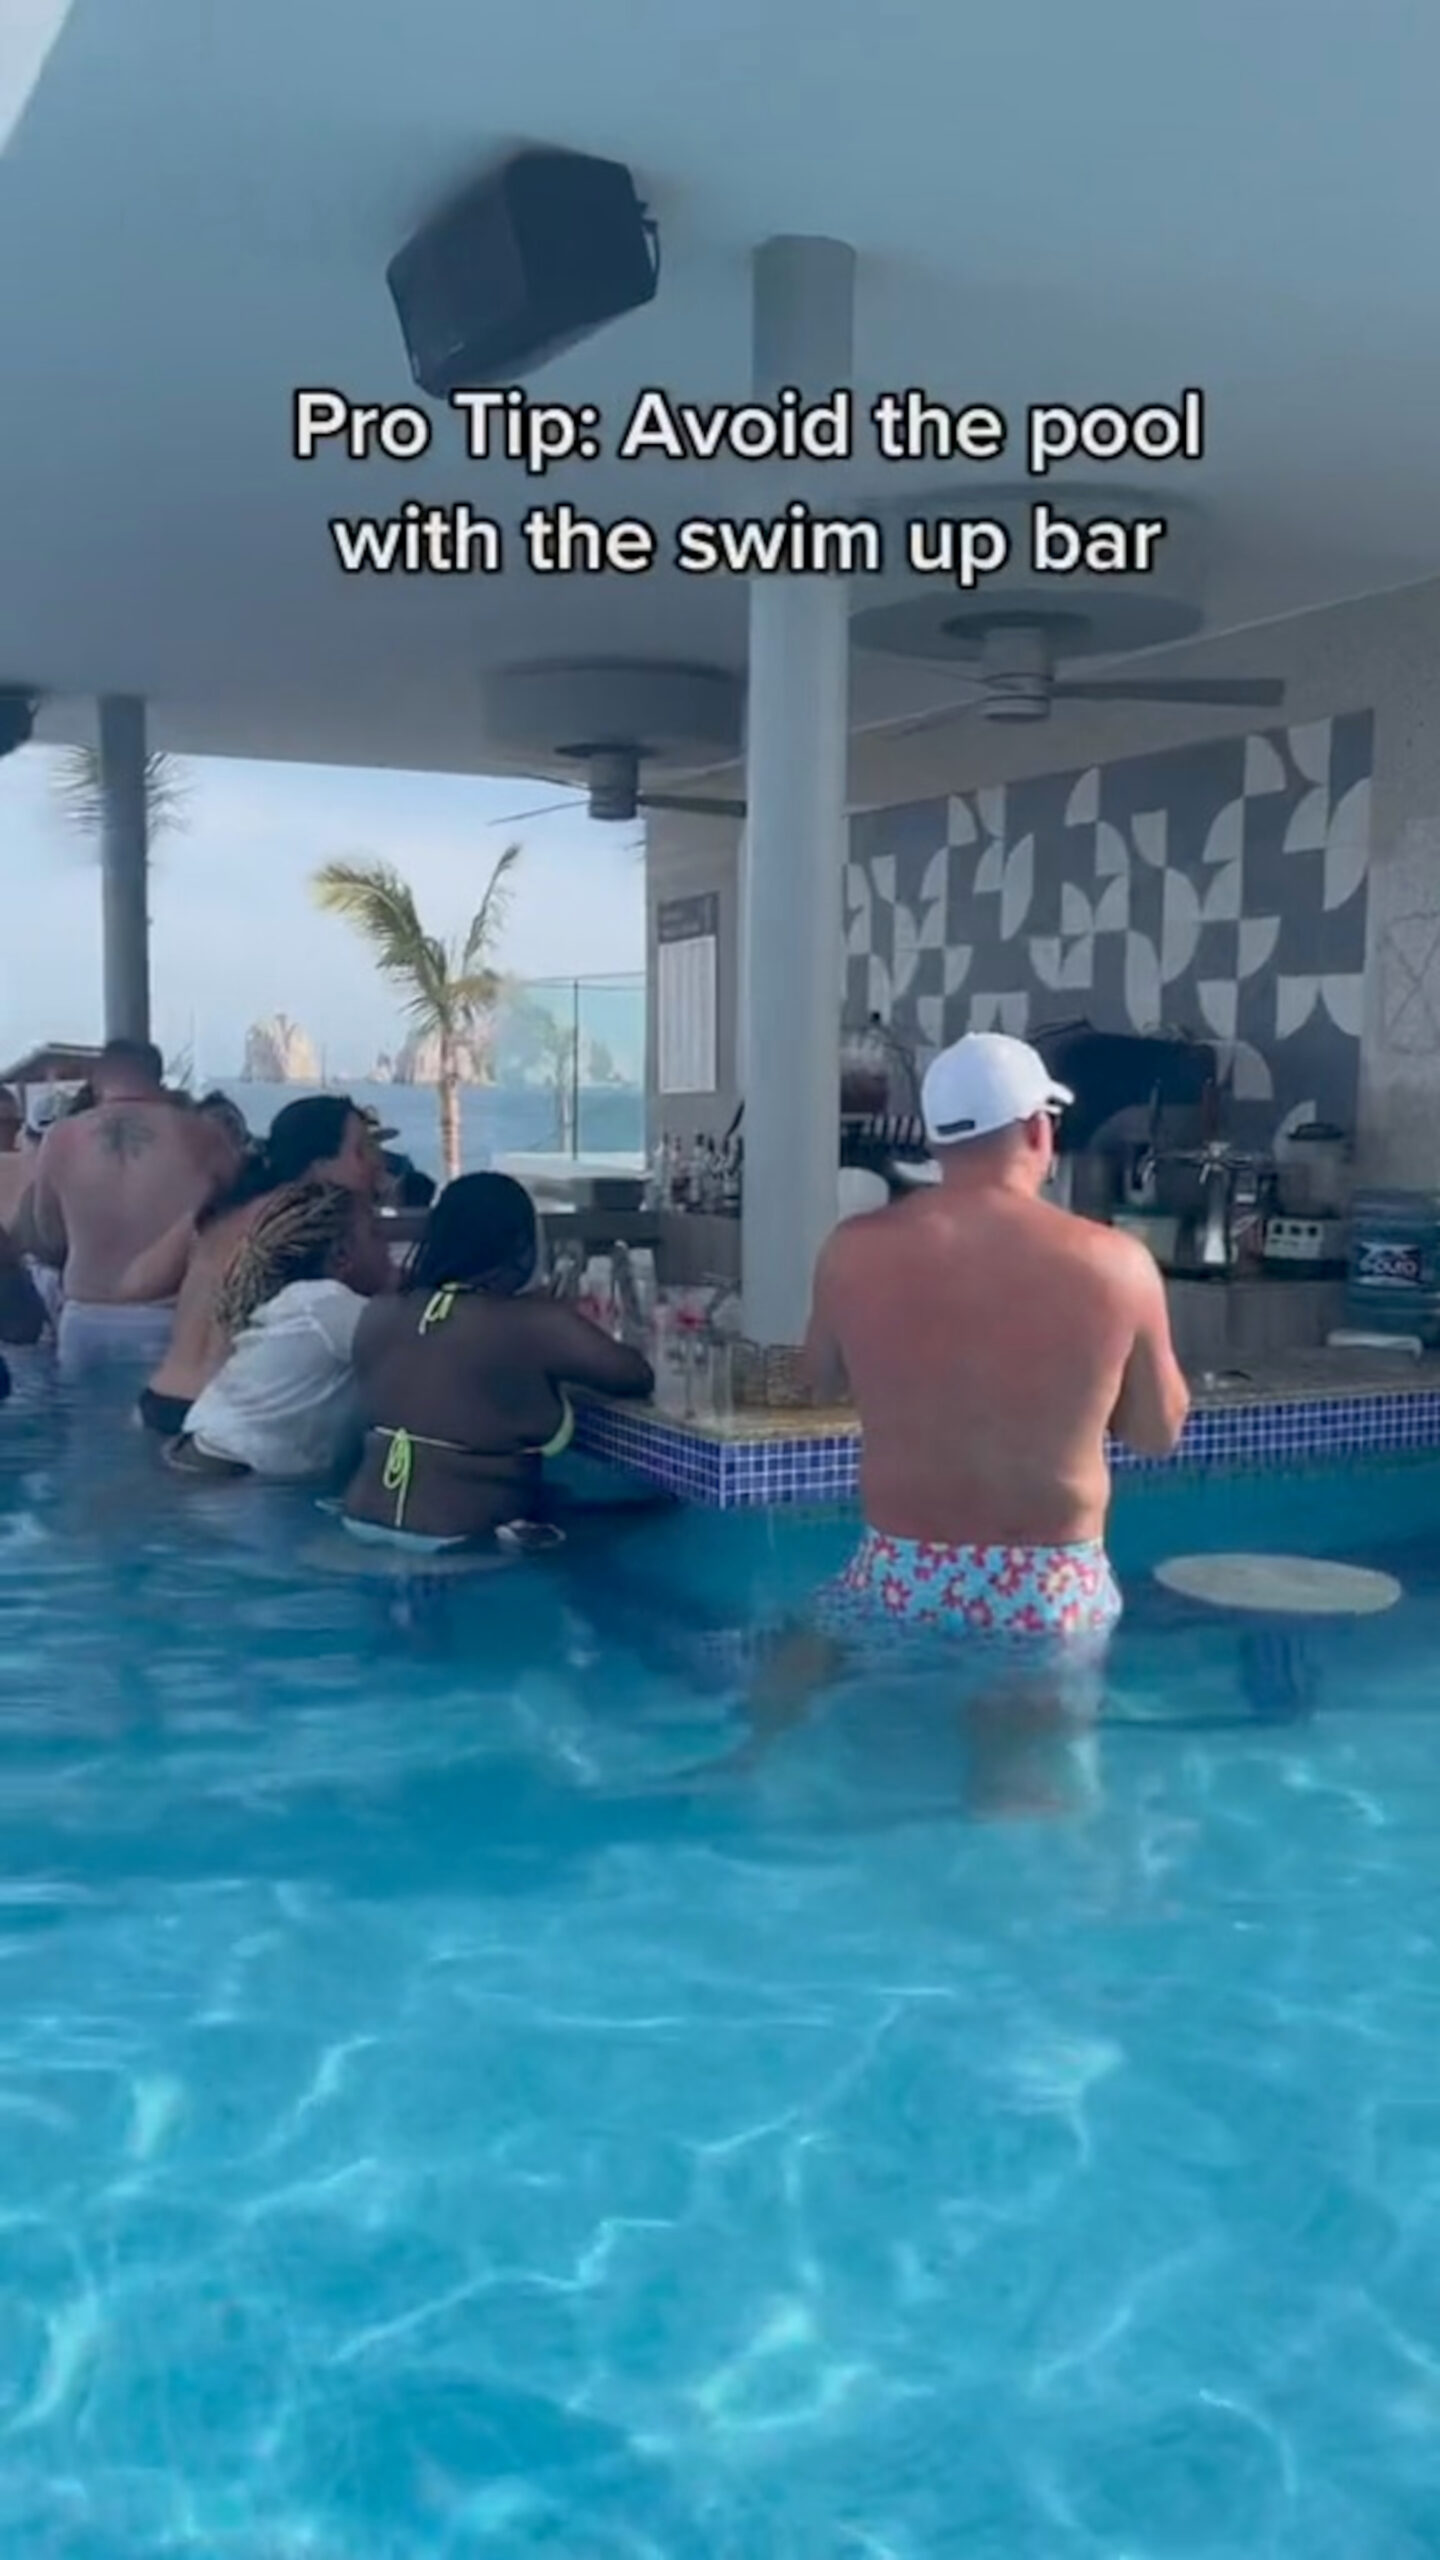 Woman explains why tourists should avoid swim-up bars in her hotel in Cabo, Mexico. (@twofoodpiggies/Zenger)